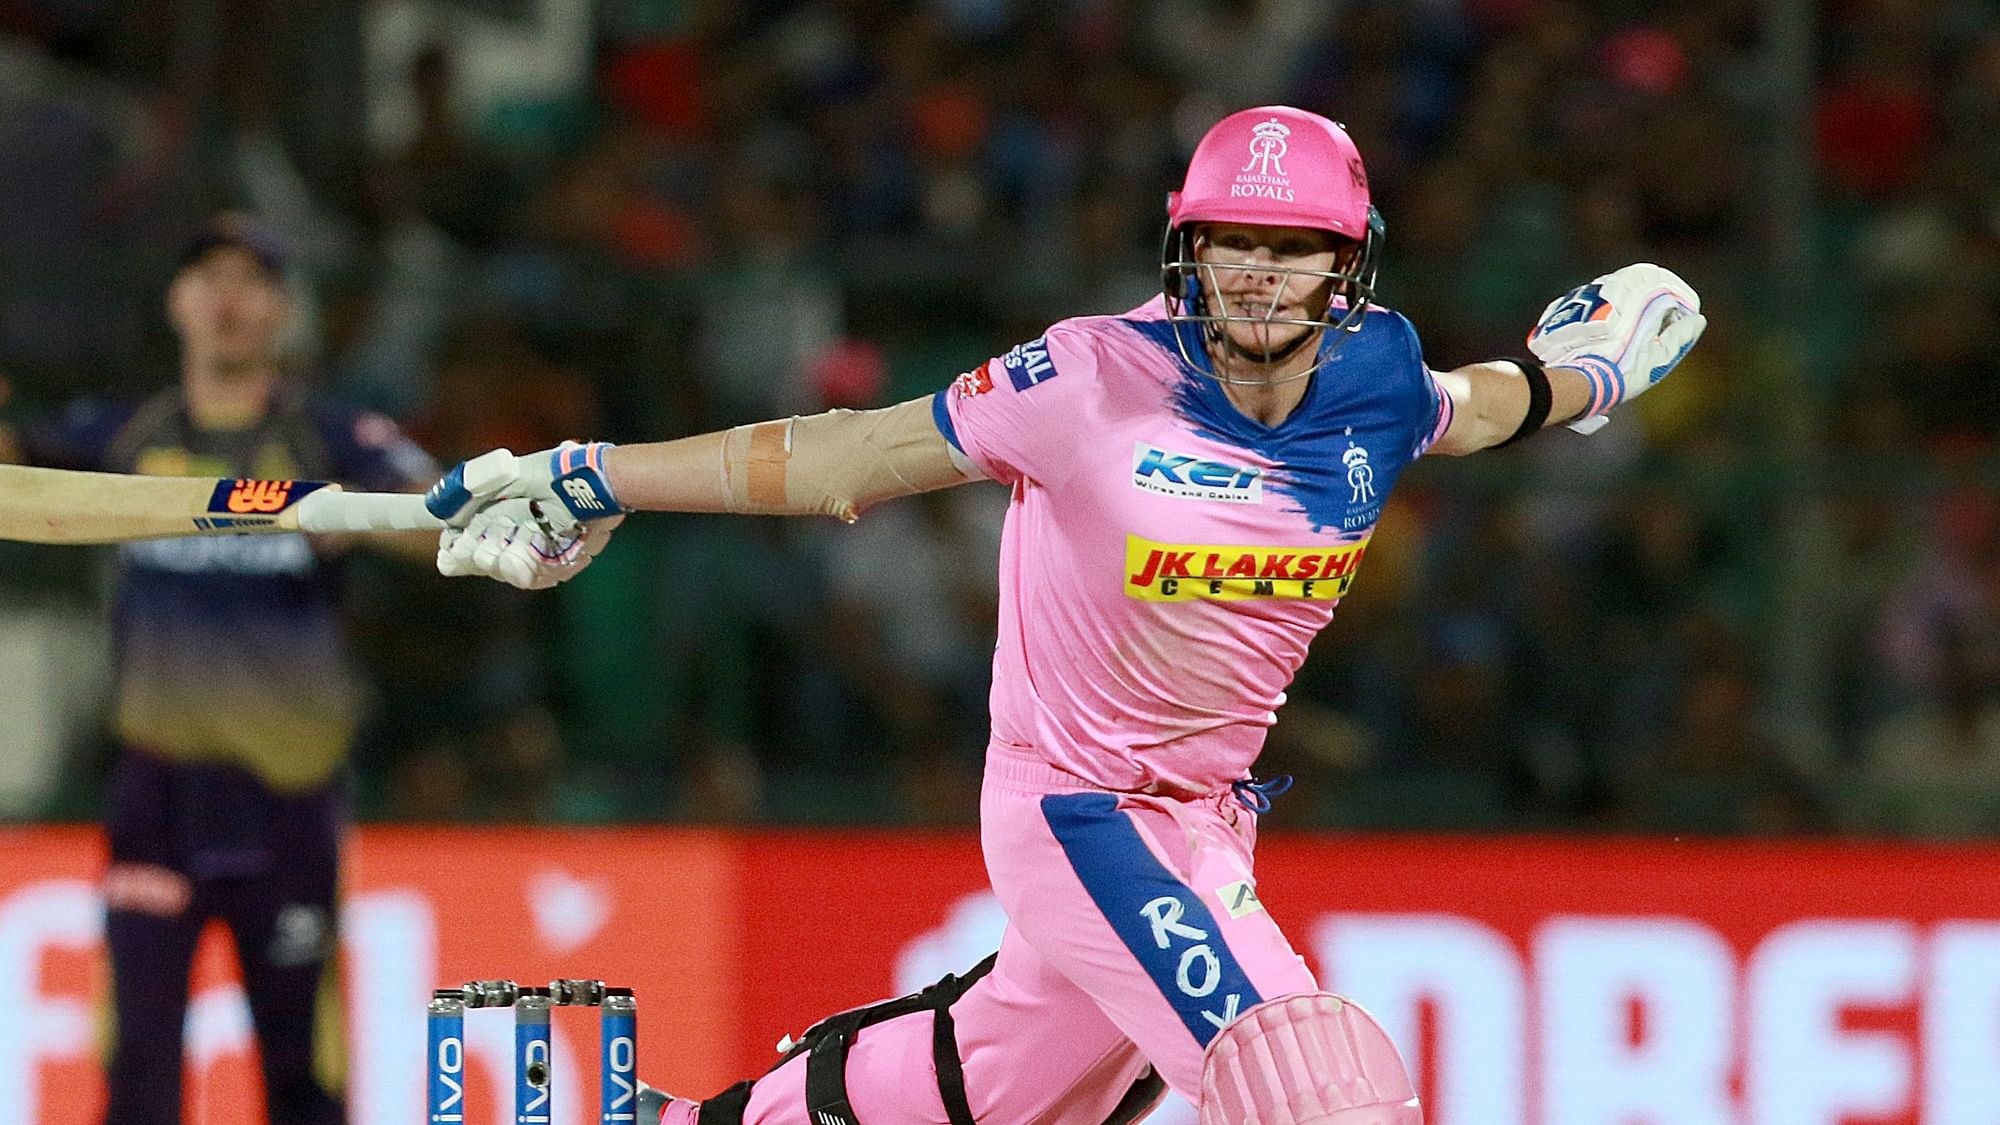 Steve Smith was released by Rajasthan Royals for IPL 2021